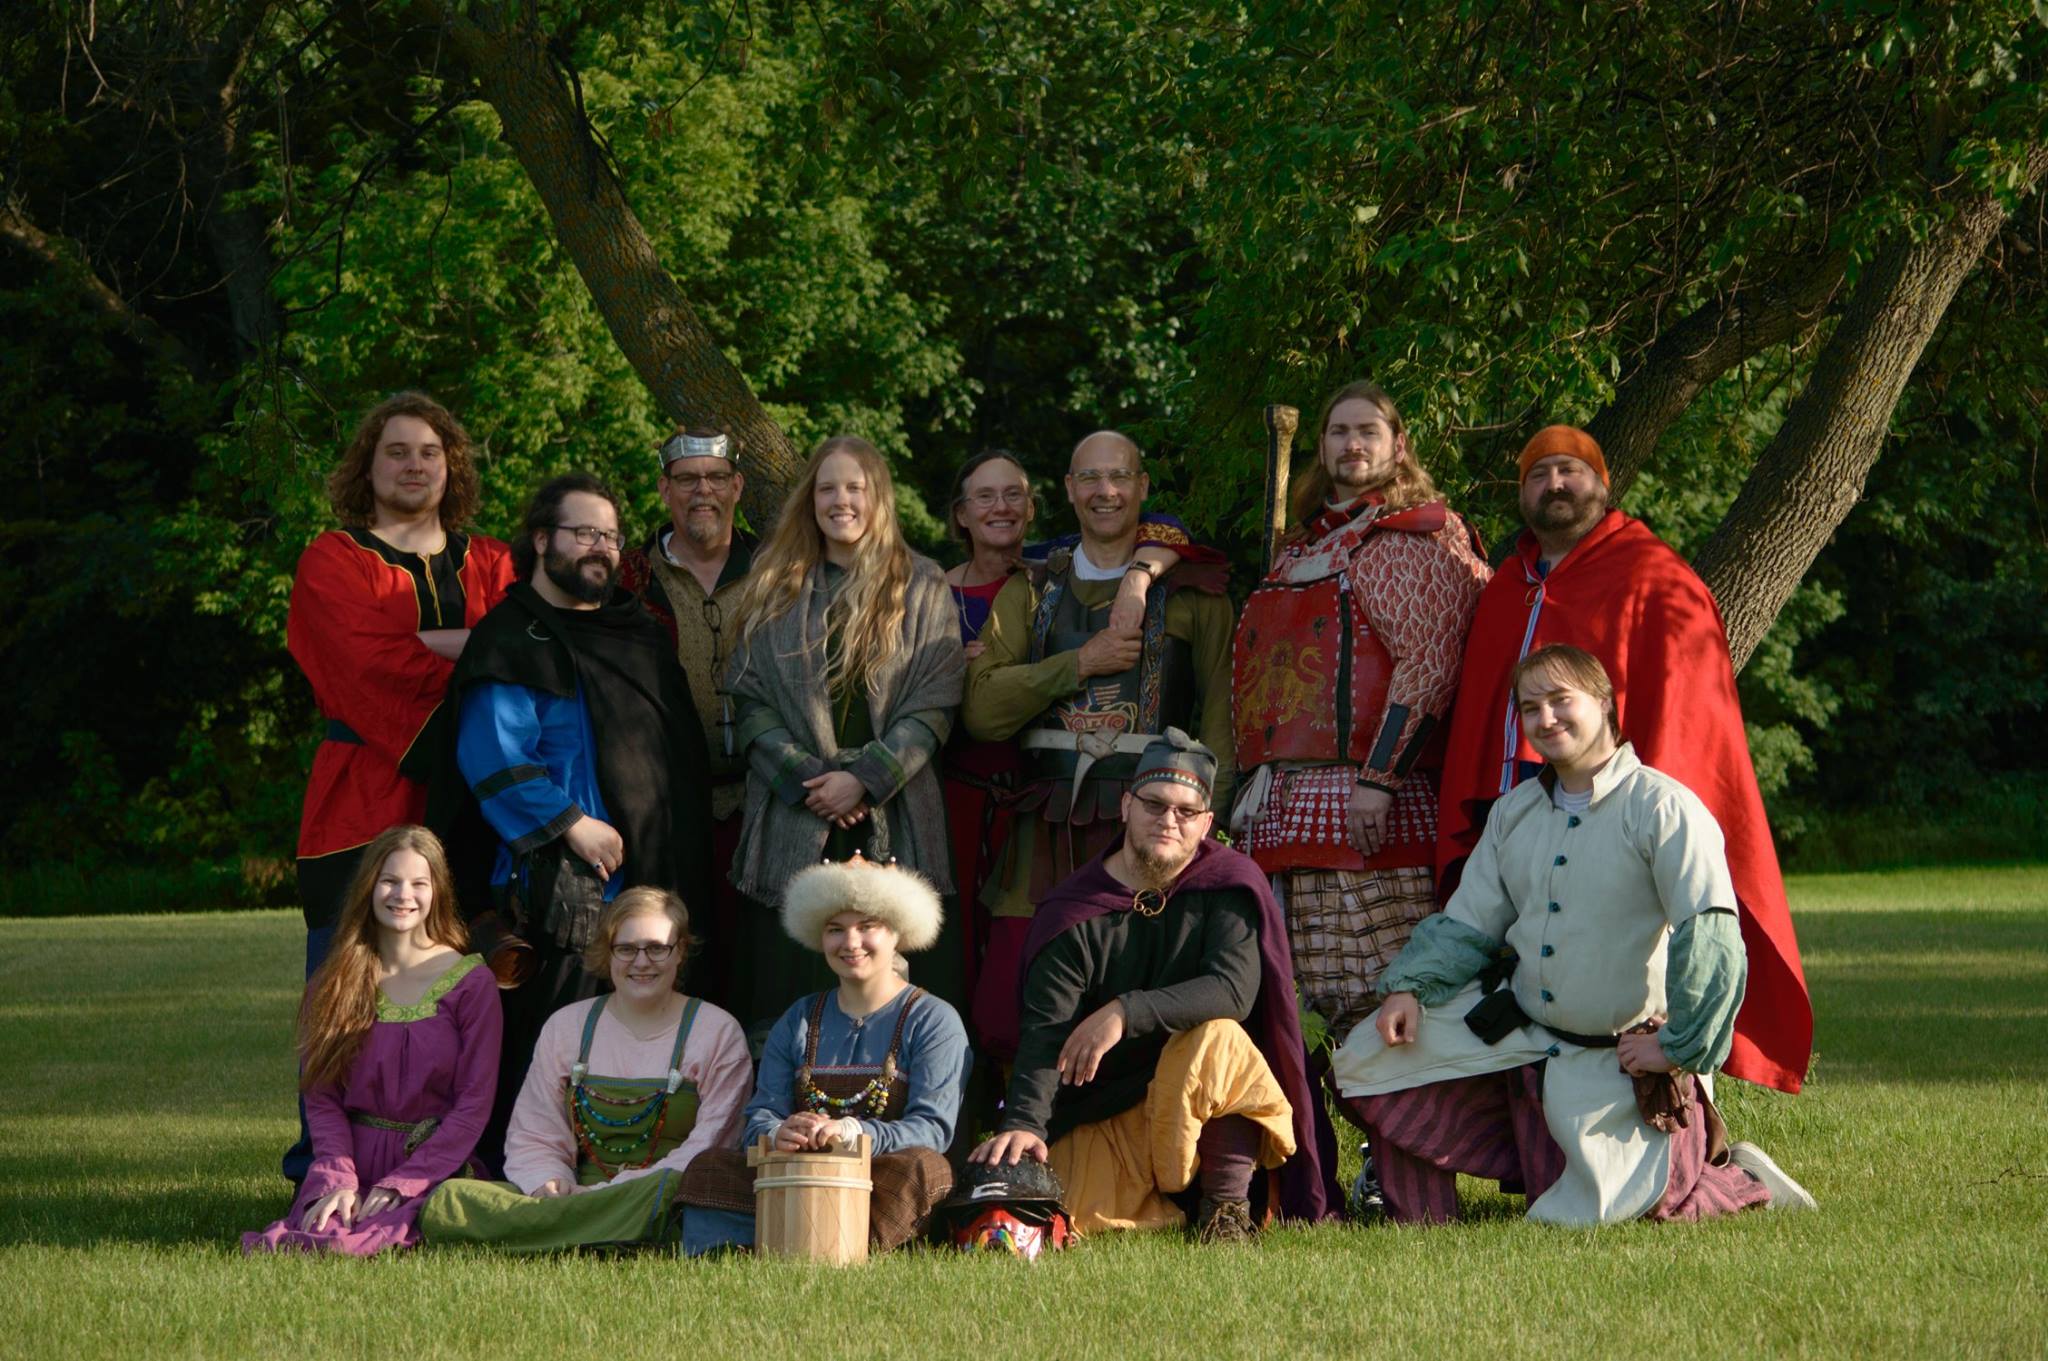 Picture of Several Korsvag Shire Members in pre-seventeenth century clothing